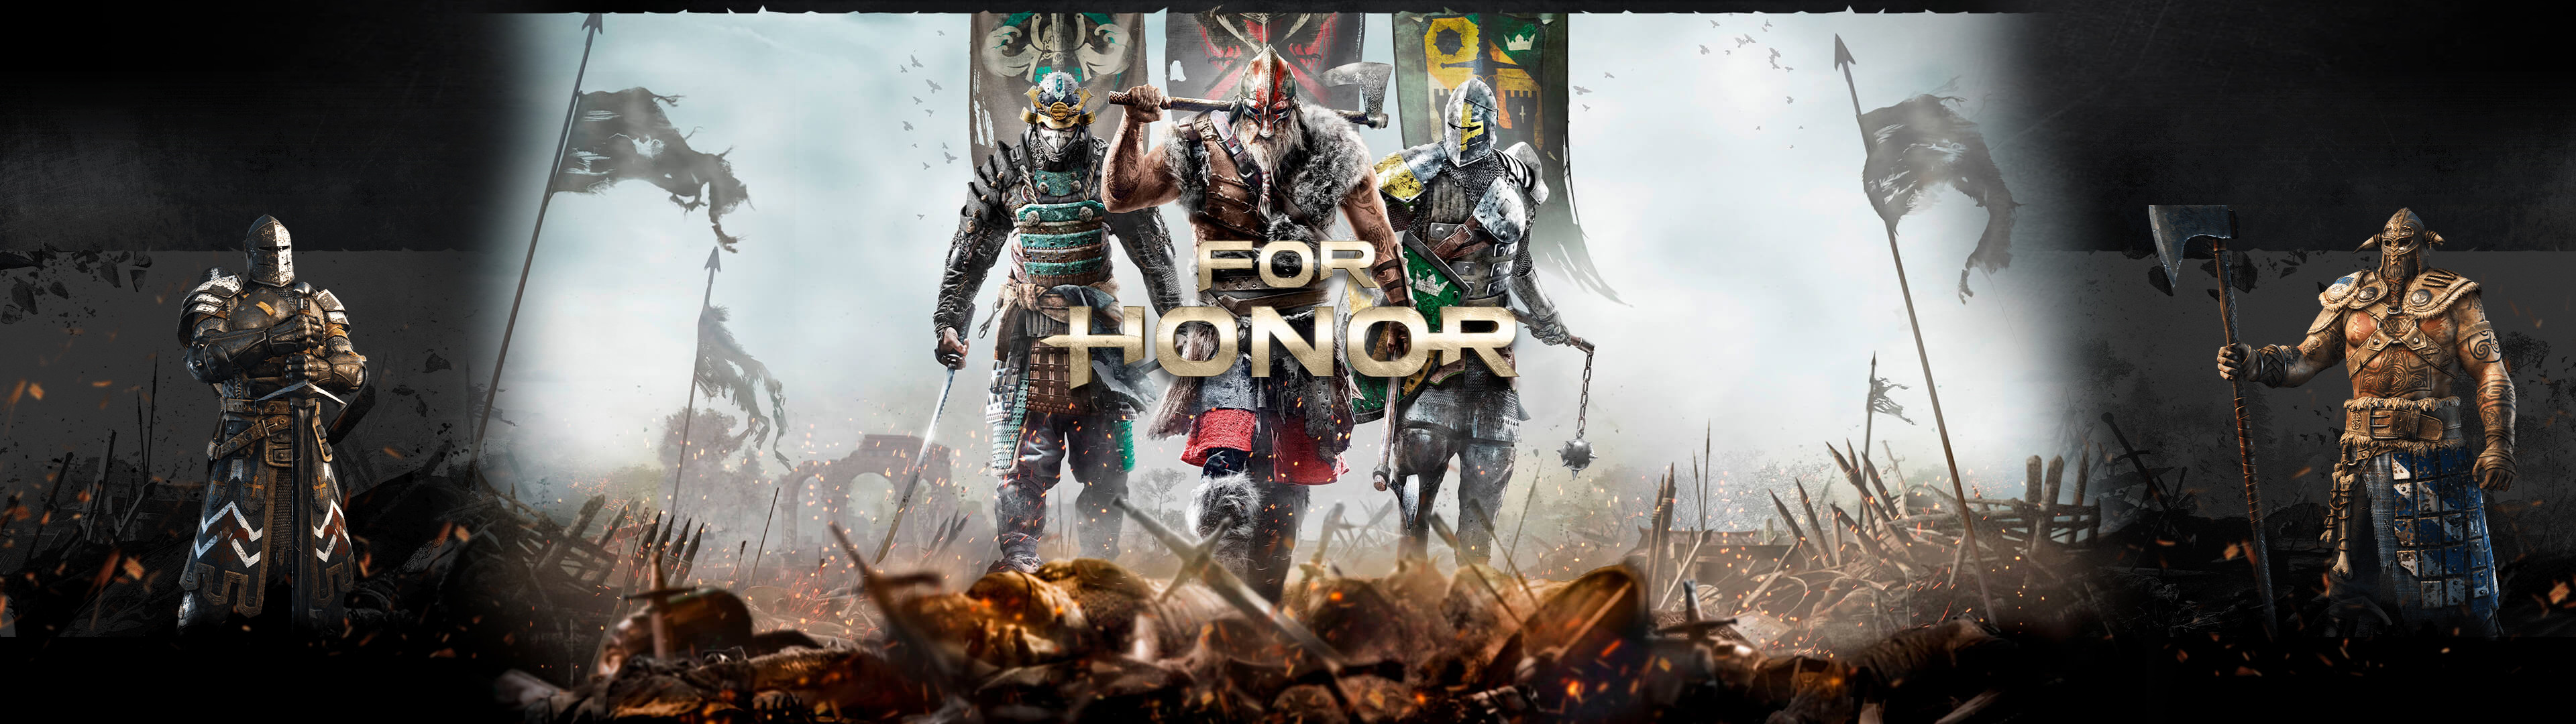 for honor wallpaper,action adventure game,strategy video game,pc game,adventure game,games